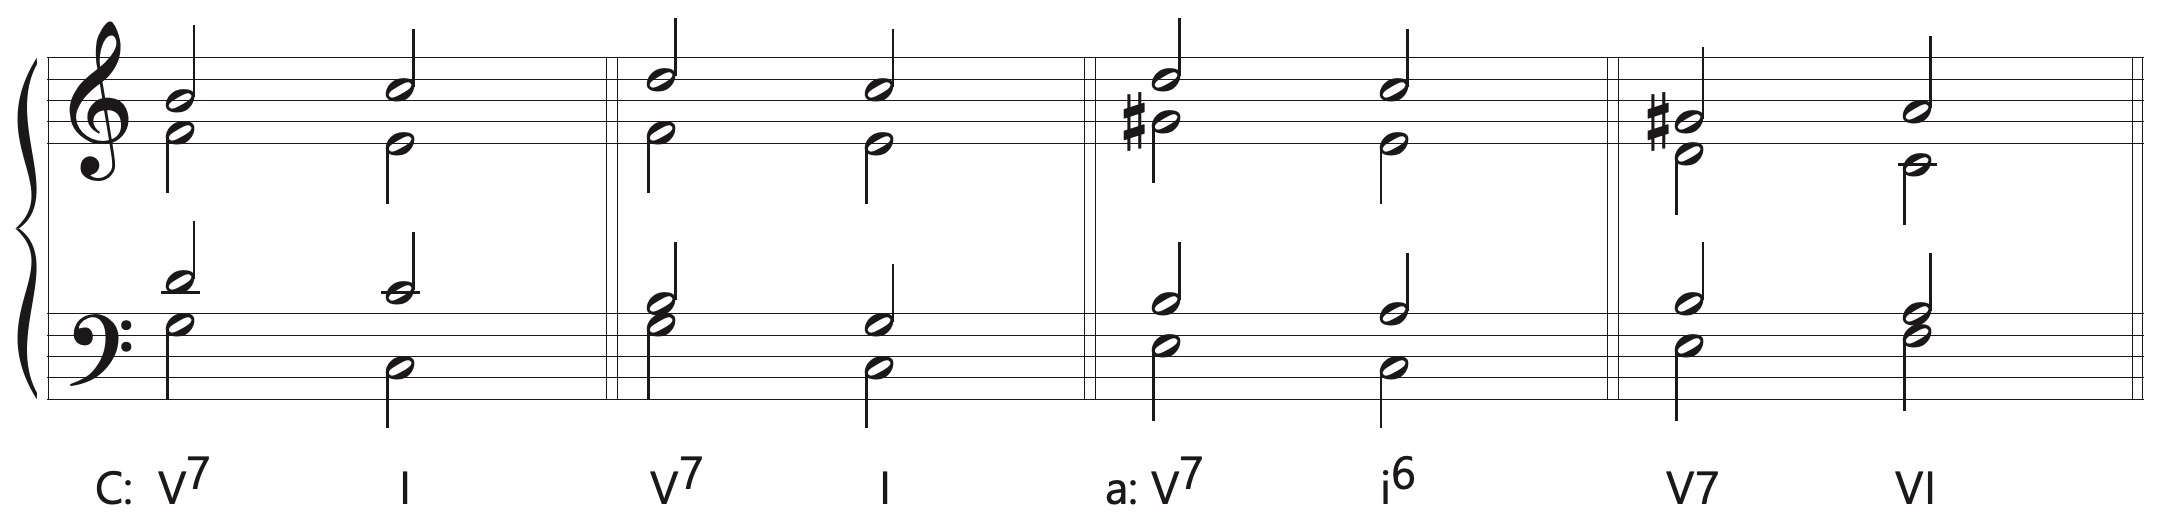 root position dominant to tonic and submediant chords